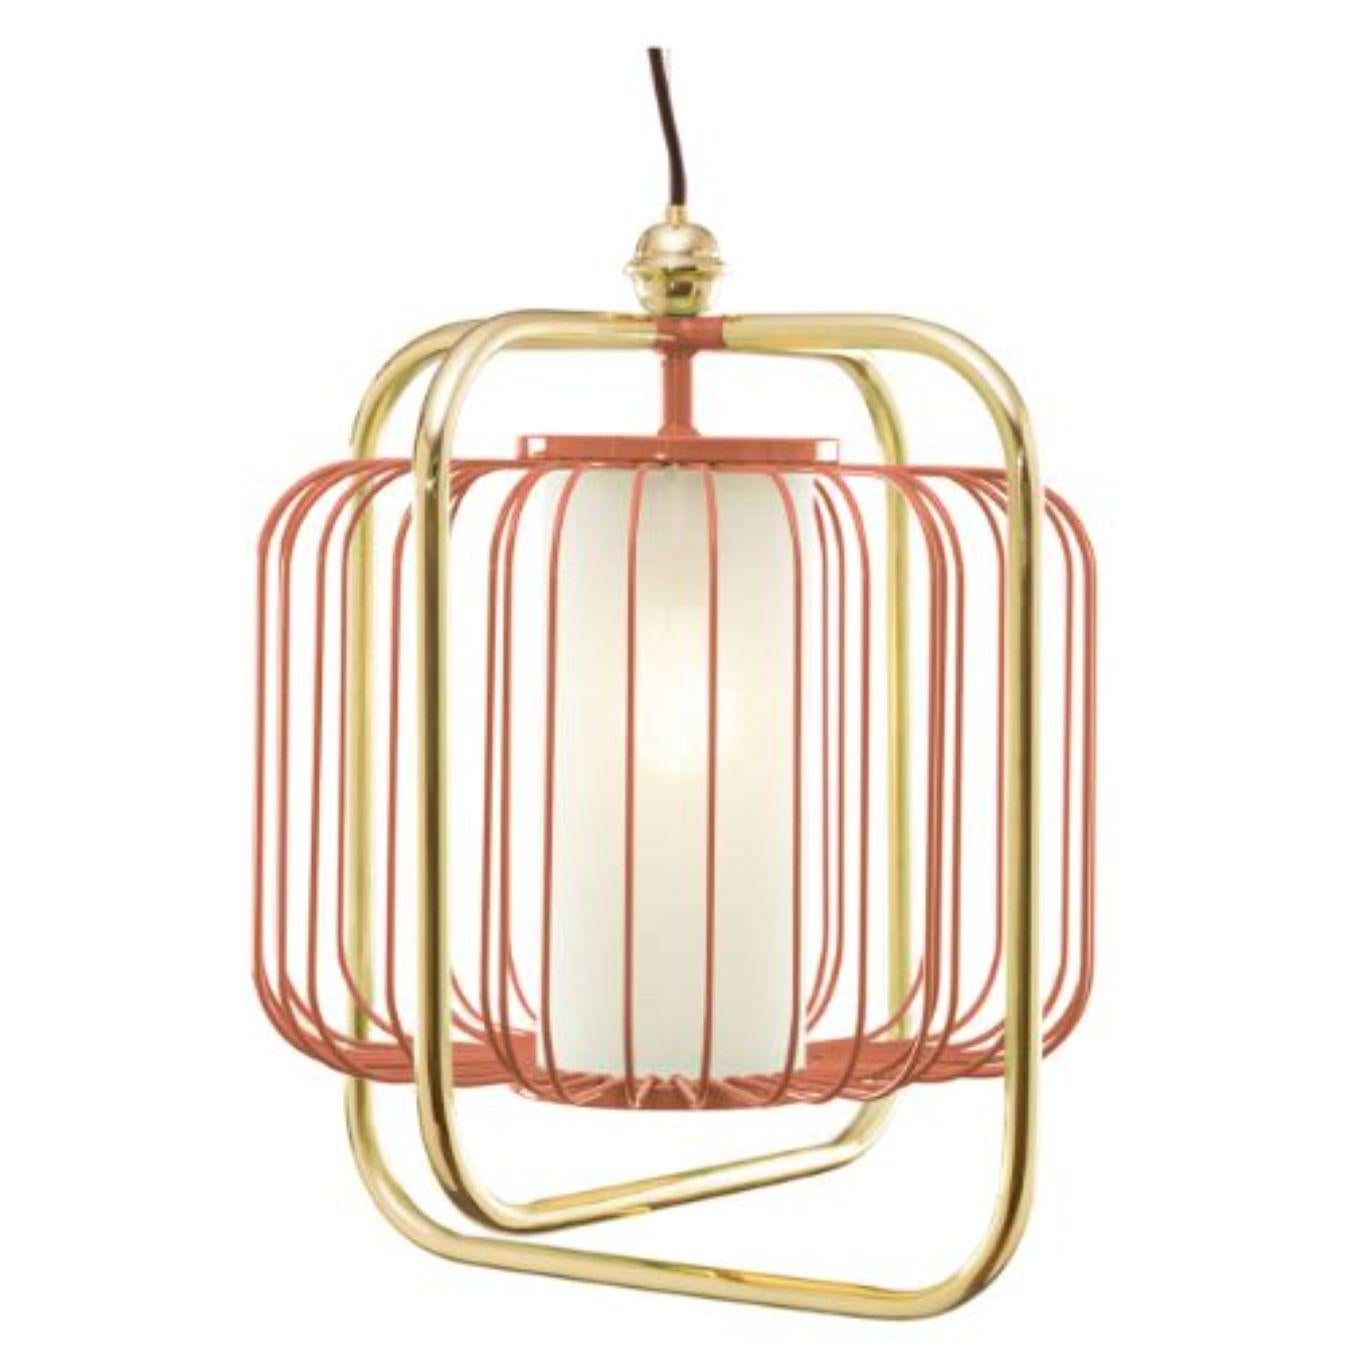 Brass and Dream Jules III Suspension Lamp by Dooq For Sale 3